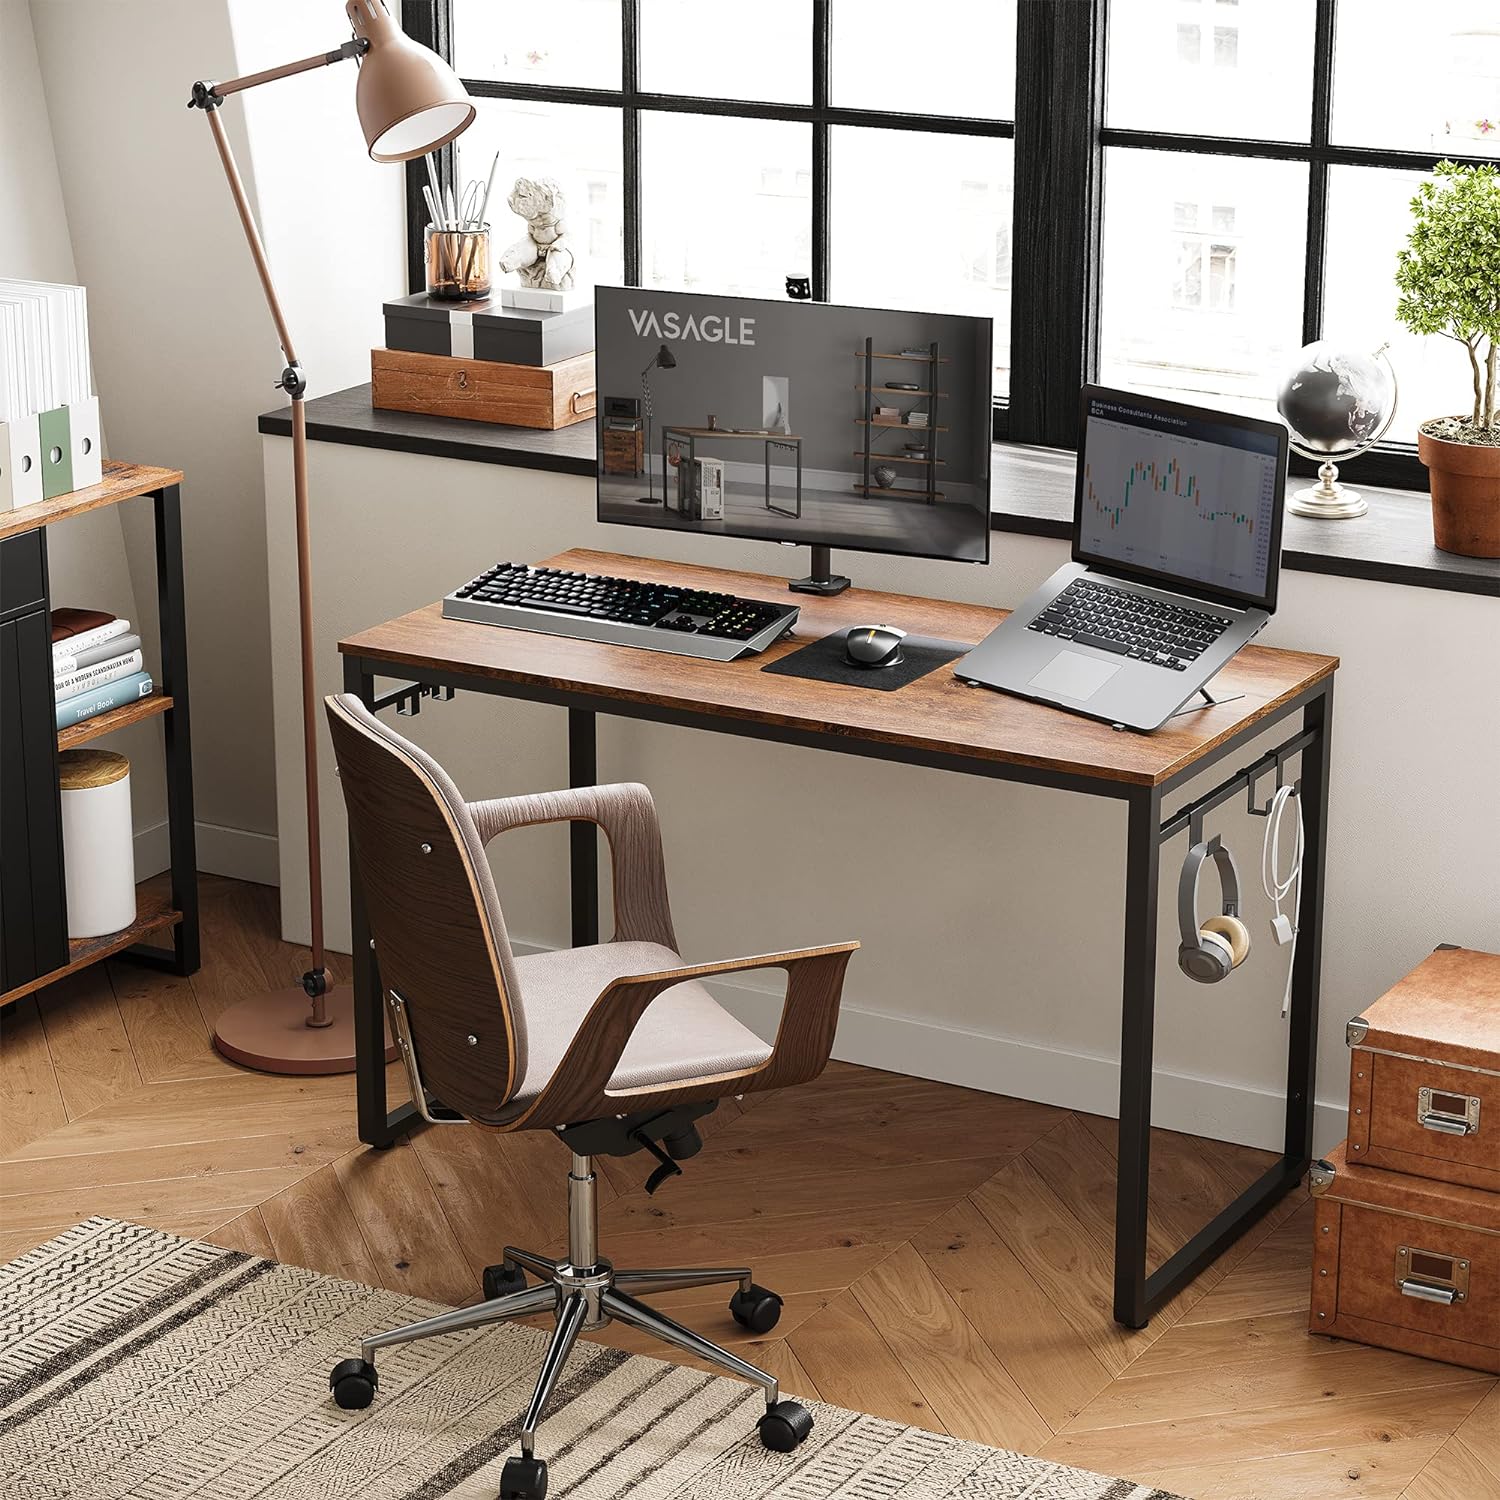 VASAGLE ALINRU Computer Desk, Office Desk with 8 Hooks, for Study, Home Office, Easy Assembly, Industrial Design, 47.2 x 23.6 x 29.5 Inches, Walnut Brown and Black ULWD058B08